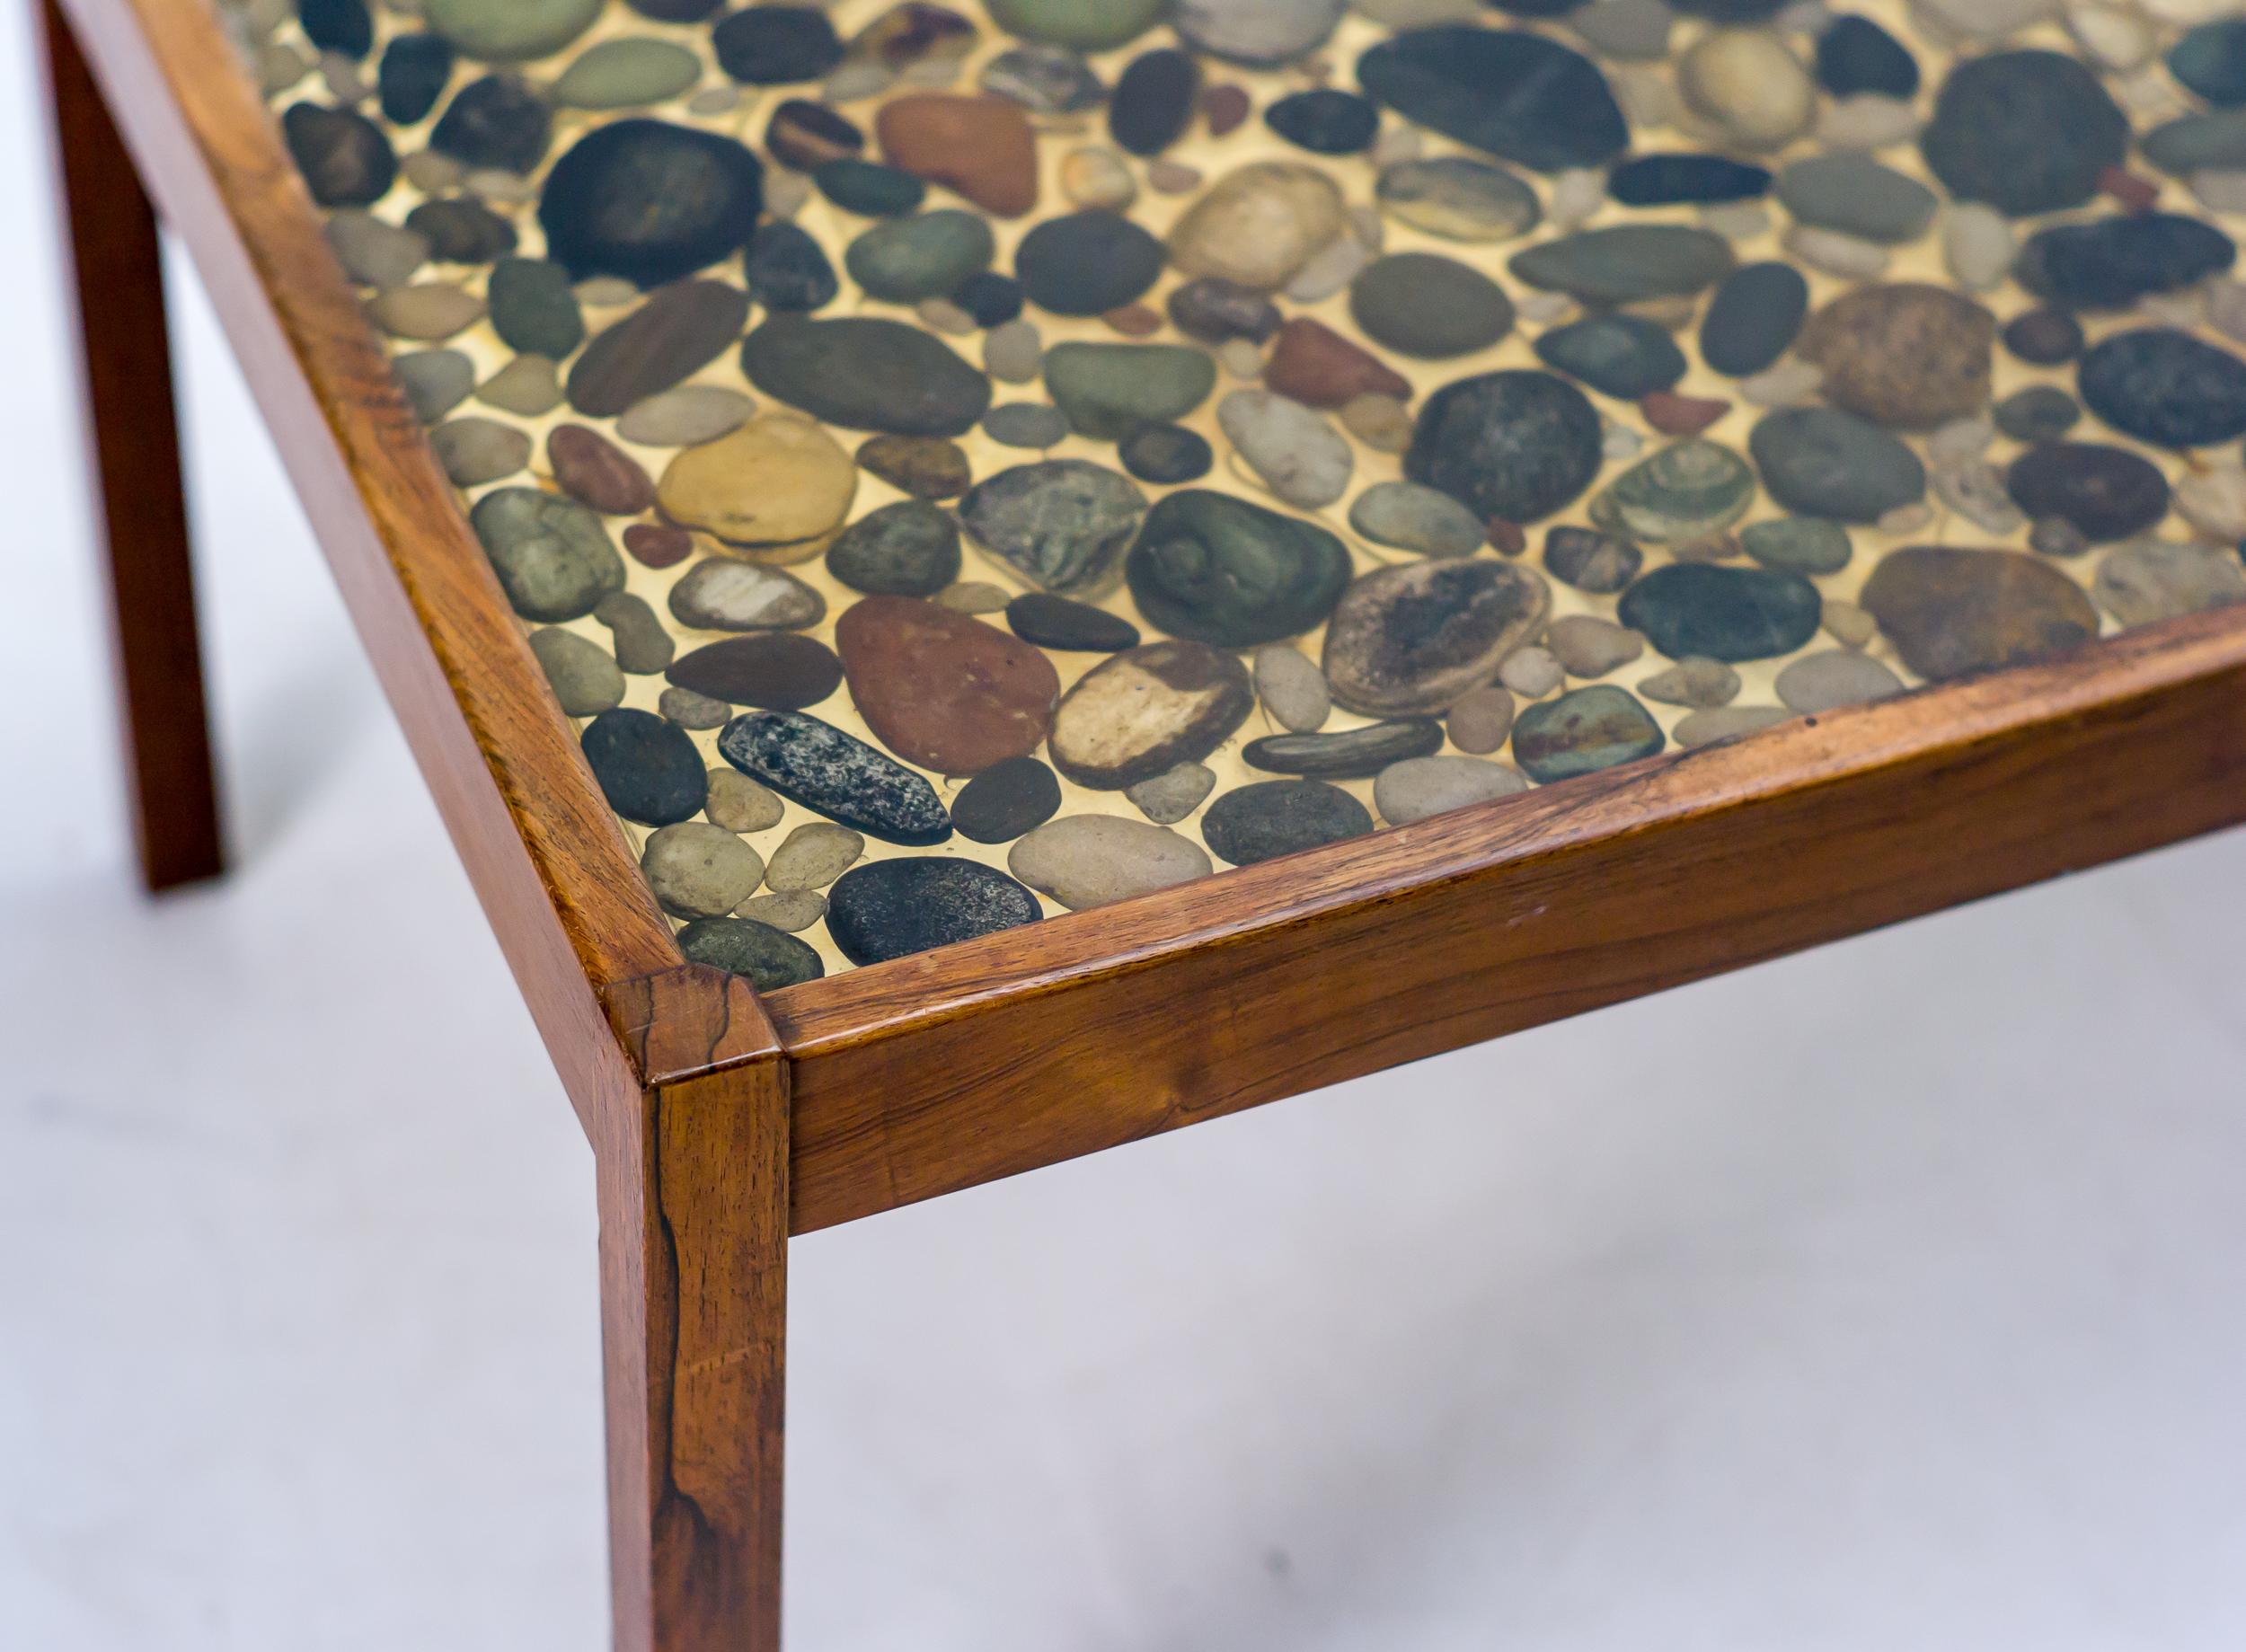 Rosewood coffee table designed by Ib Kofod-Larsen for Seffle Möbelfabrik.
Exceptional table with a polyester top with cast in natural pebbles.
All original condition with light wear, providing a nice patina.

Ib Kofod-Larsen was born in 1921 in